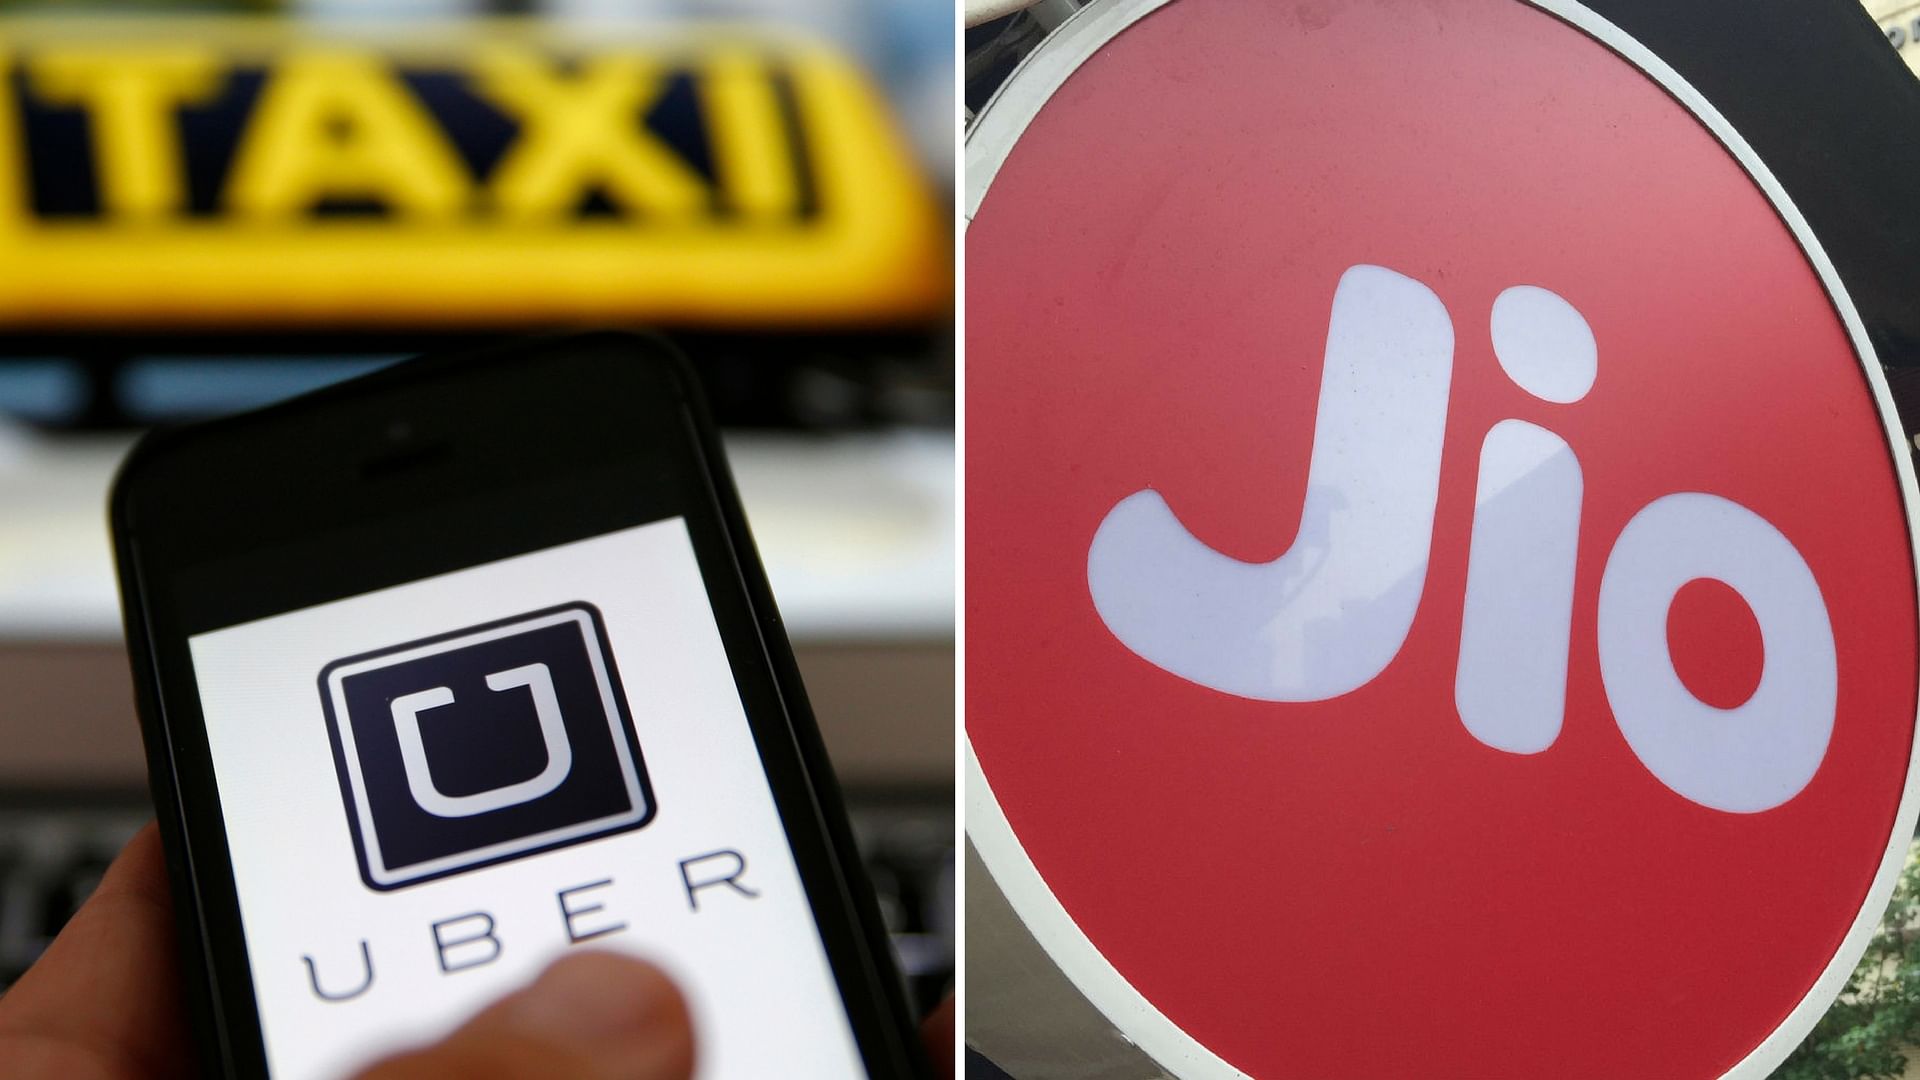 Reliance Jio cabs could soon rival Uber in India? (Photo: <b>The Quint</b>)